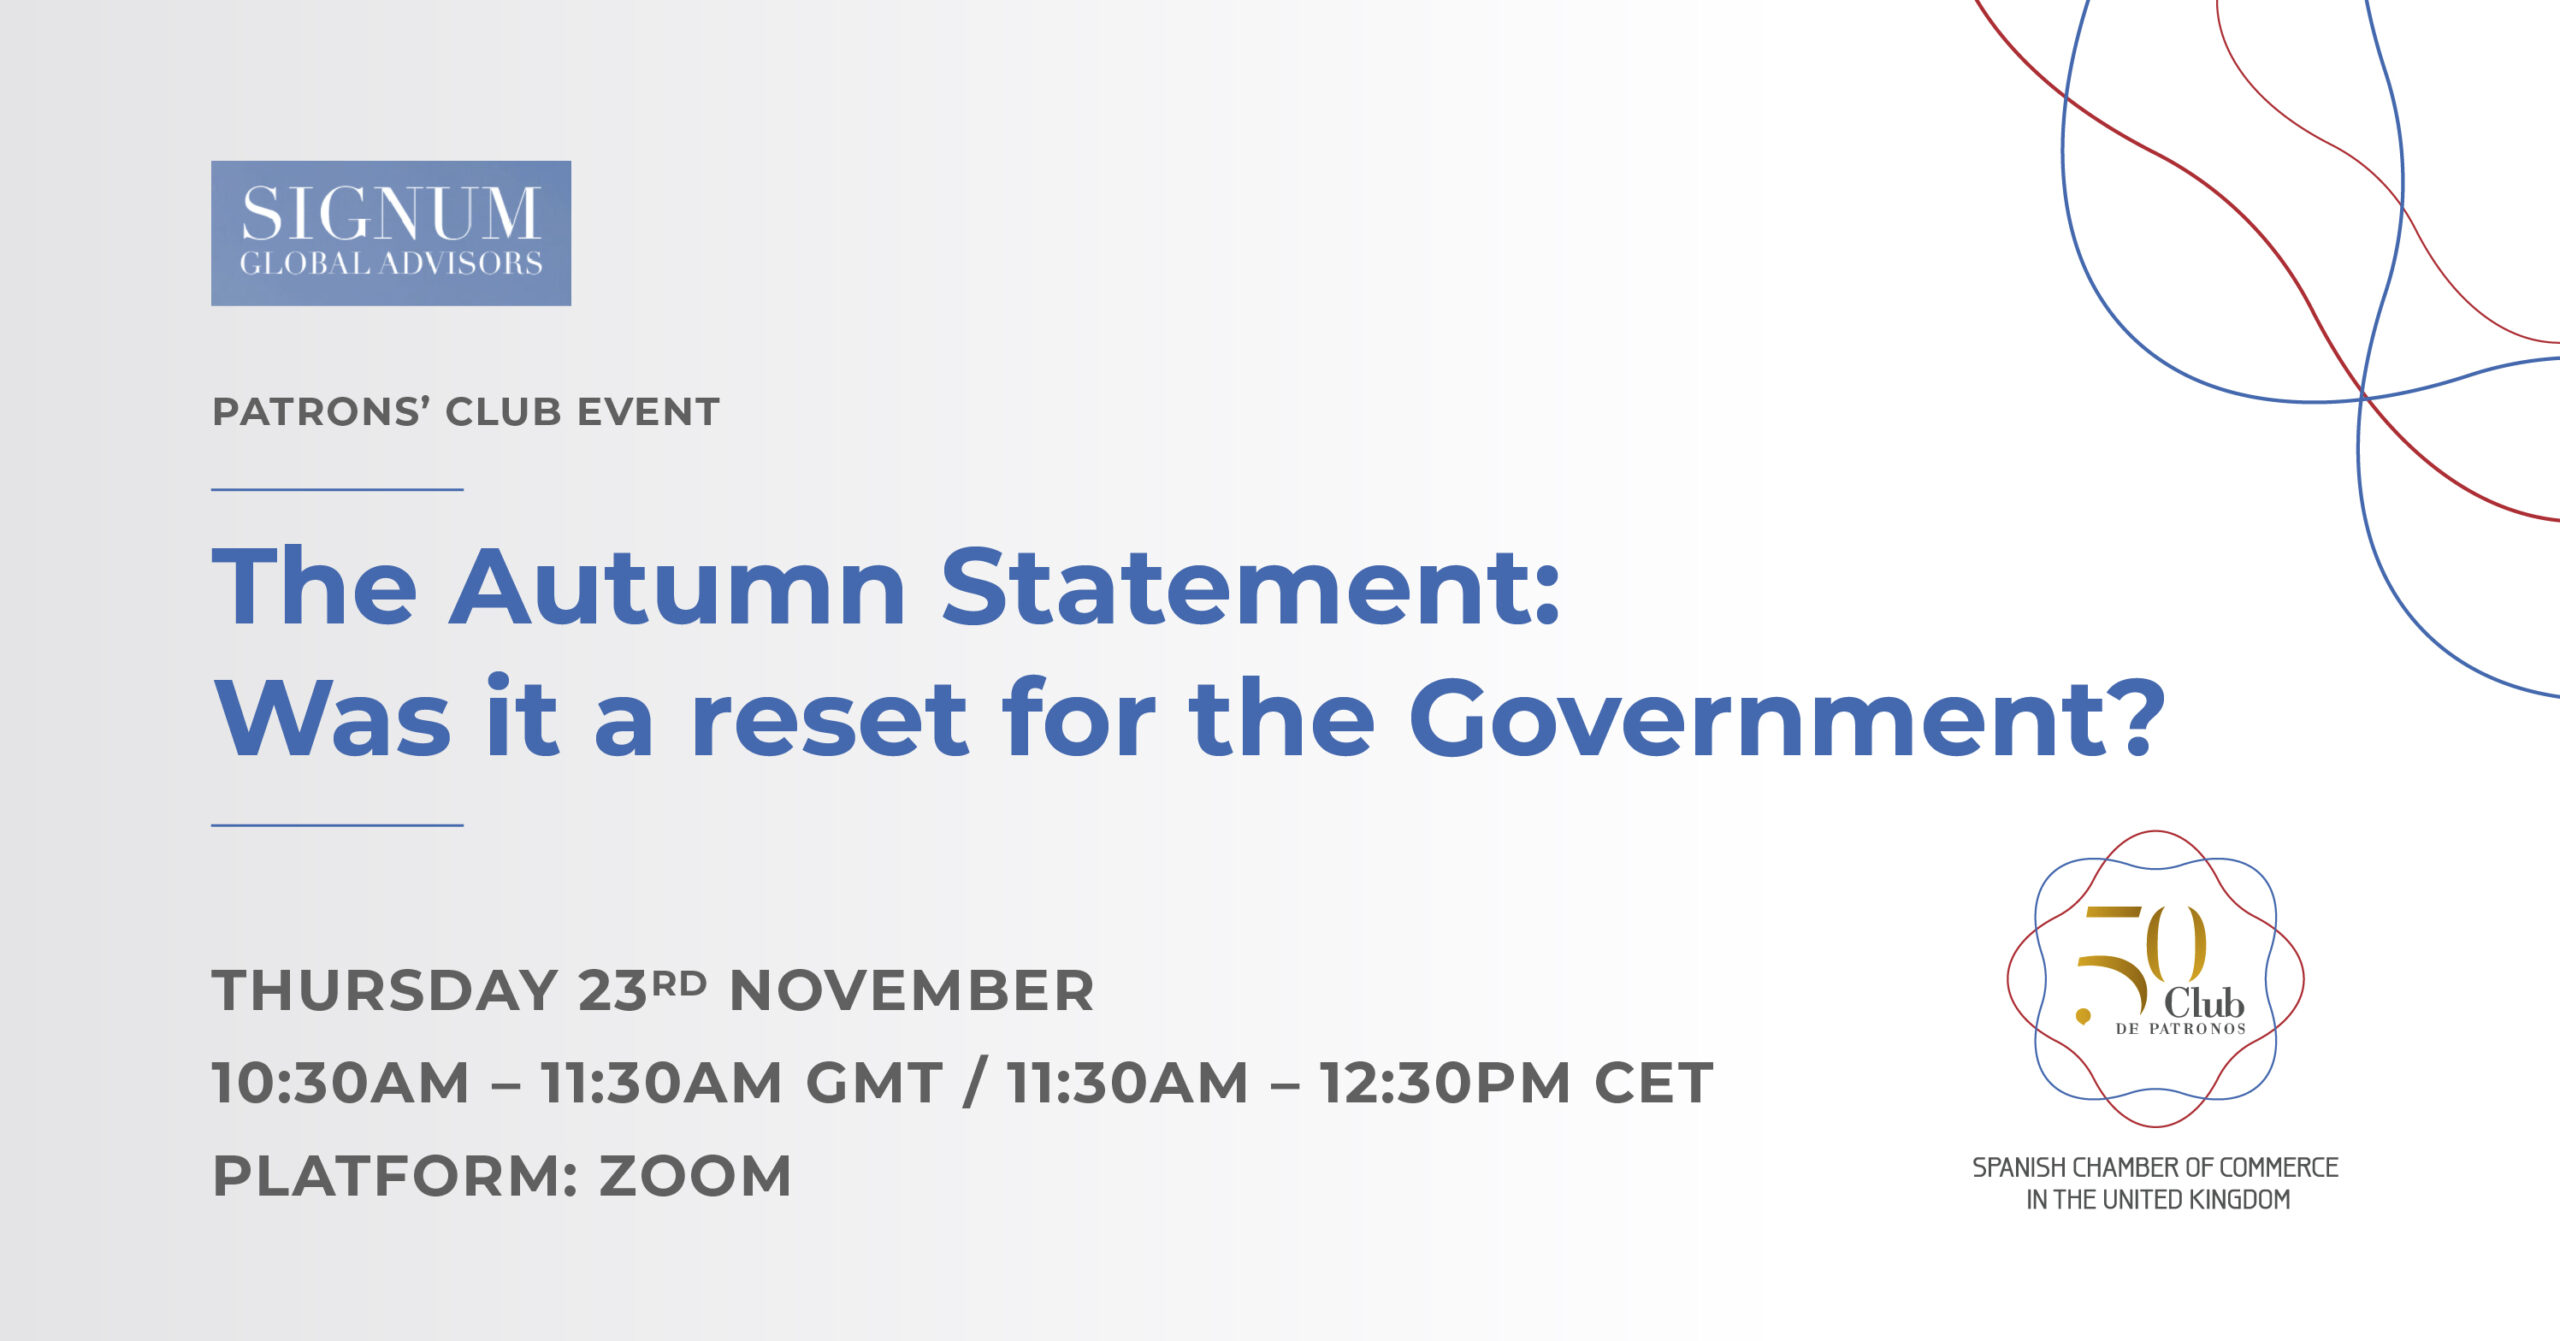 PATRONS’ CLUB EVENT | THE AUTUMN STATEMENT: WAS IT A RESET FOR THE GOVERNMENT?